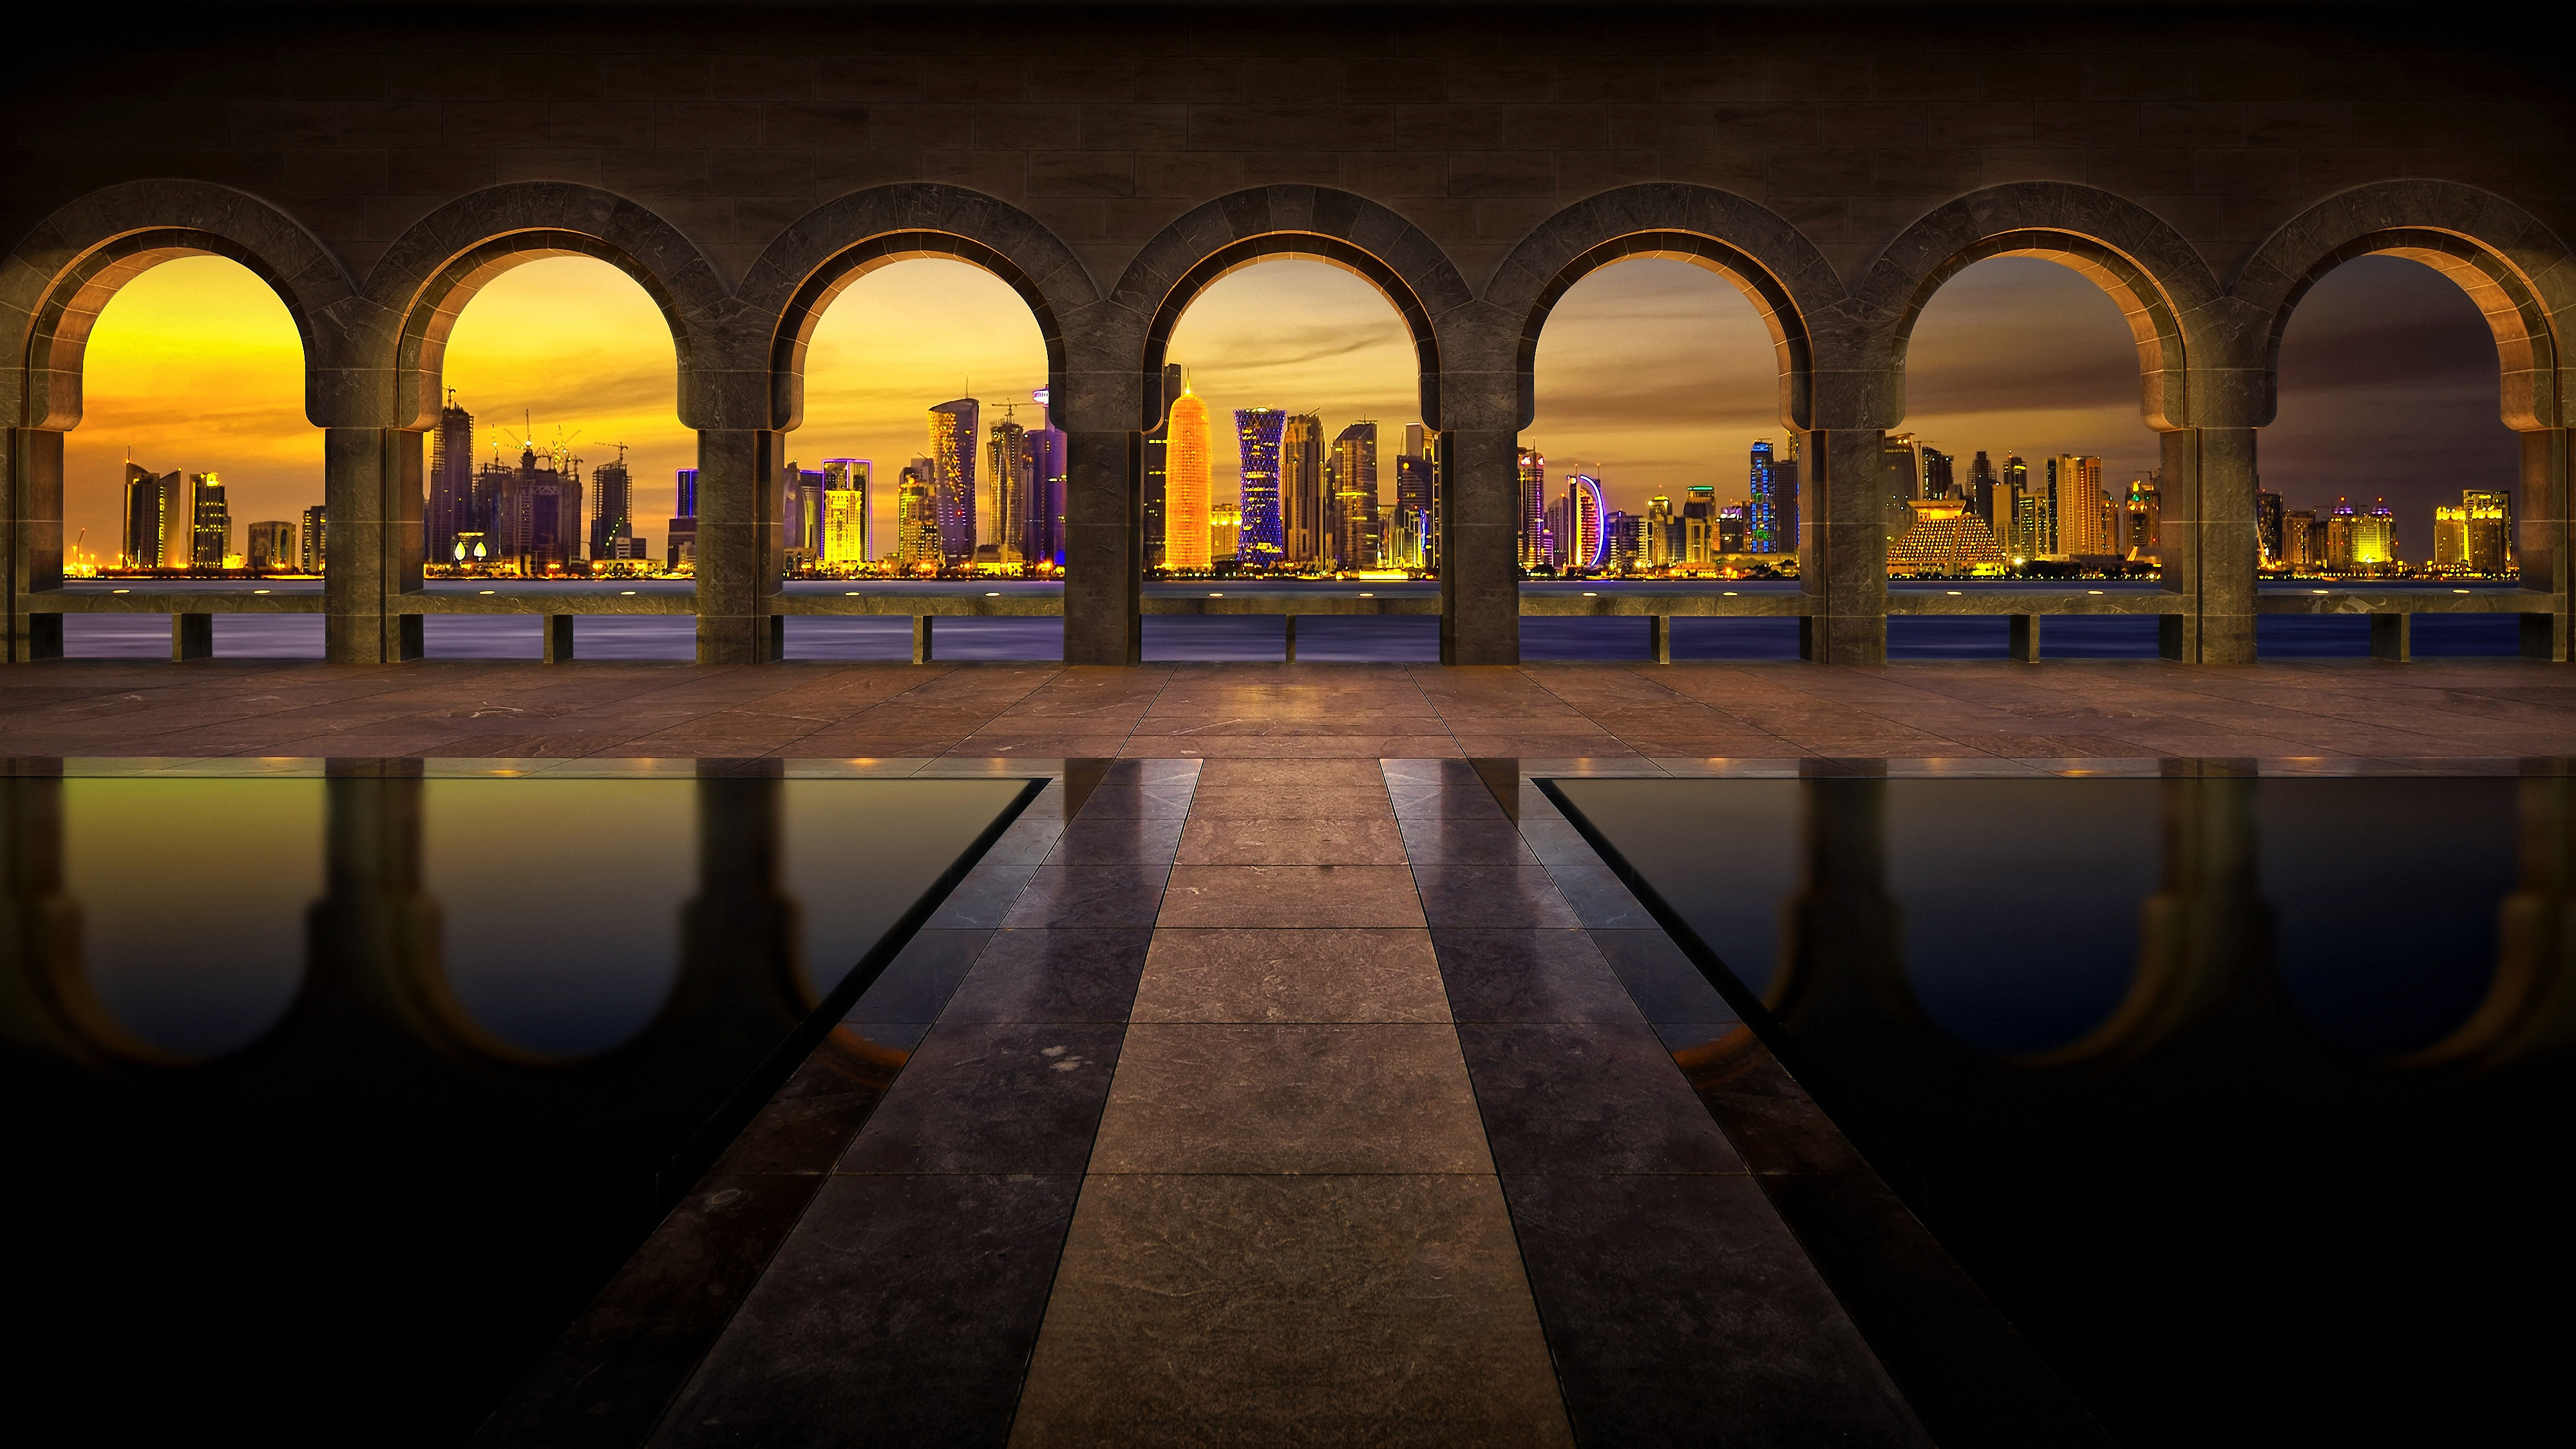 man made, doha, arch, city, cities Image for desktop